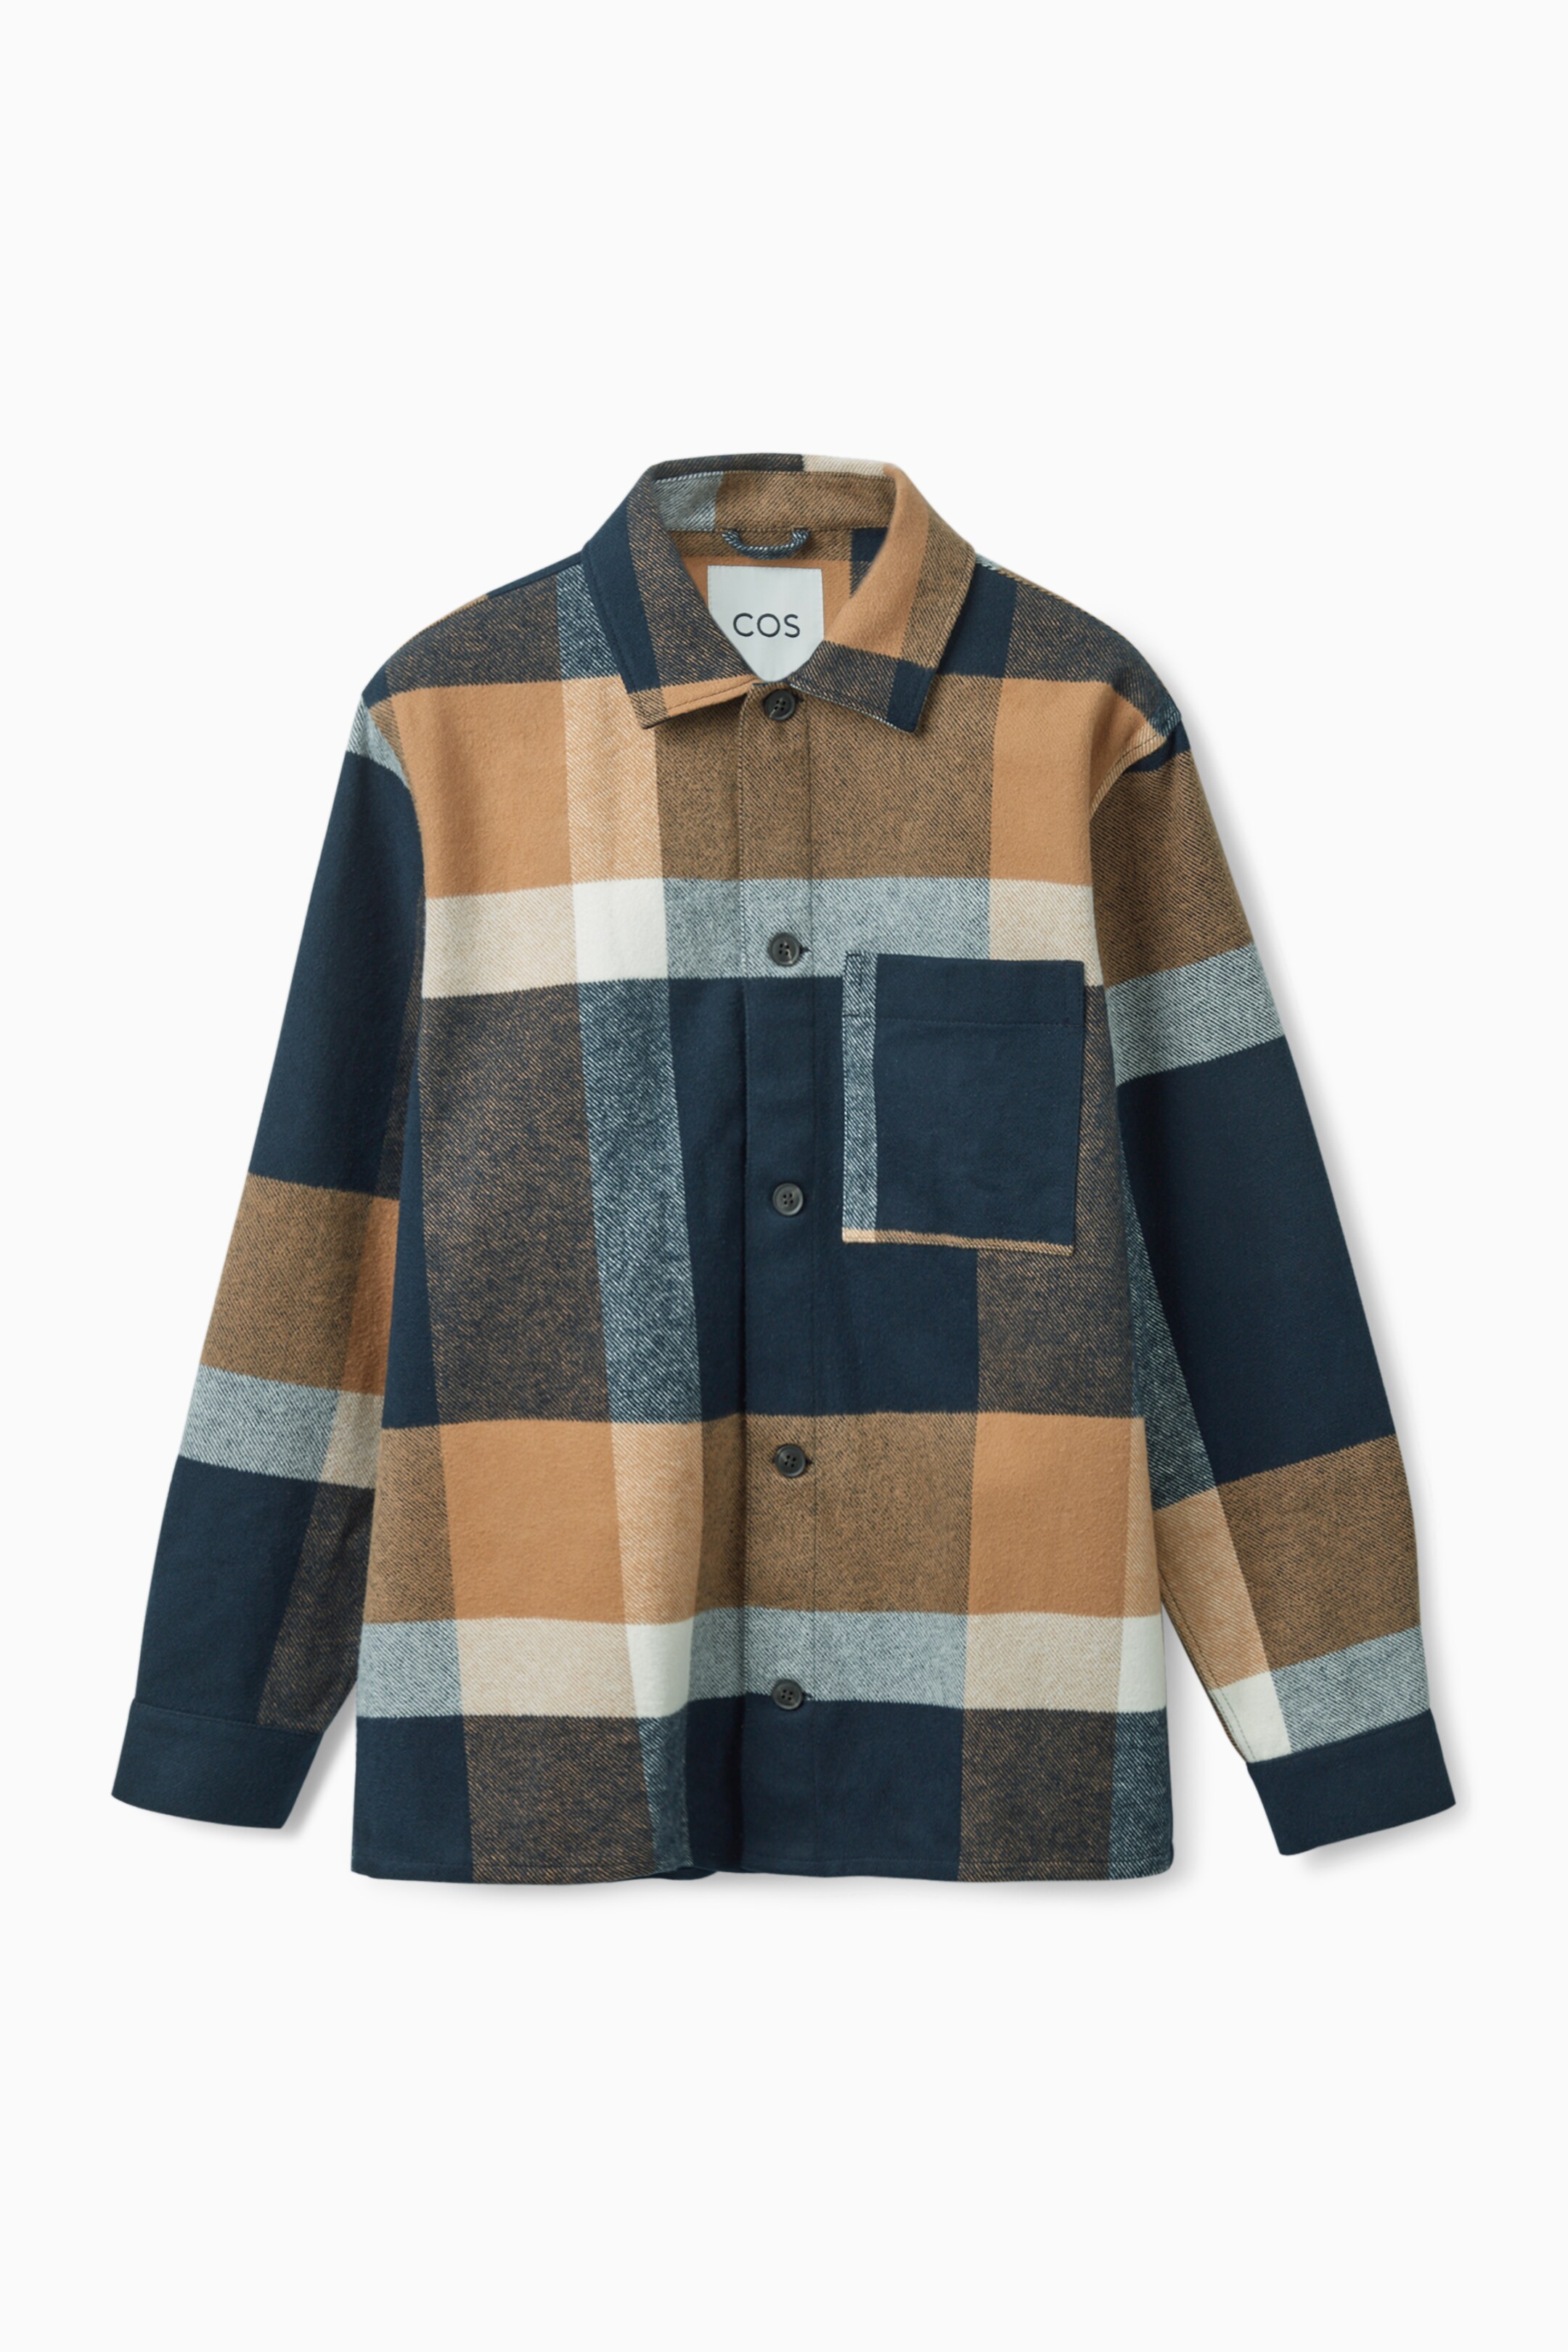 Front image of cos CHECKED OVERSHIRT in NAVY / BROWN